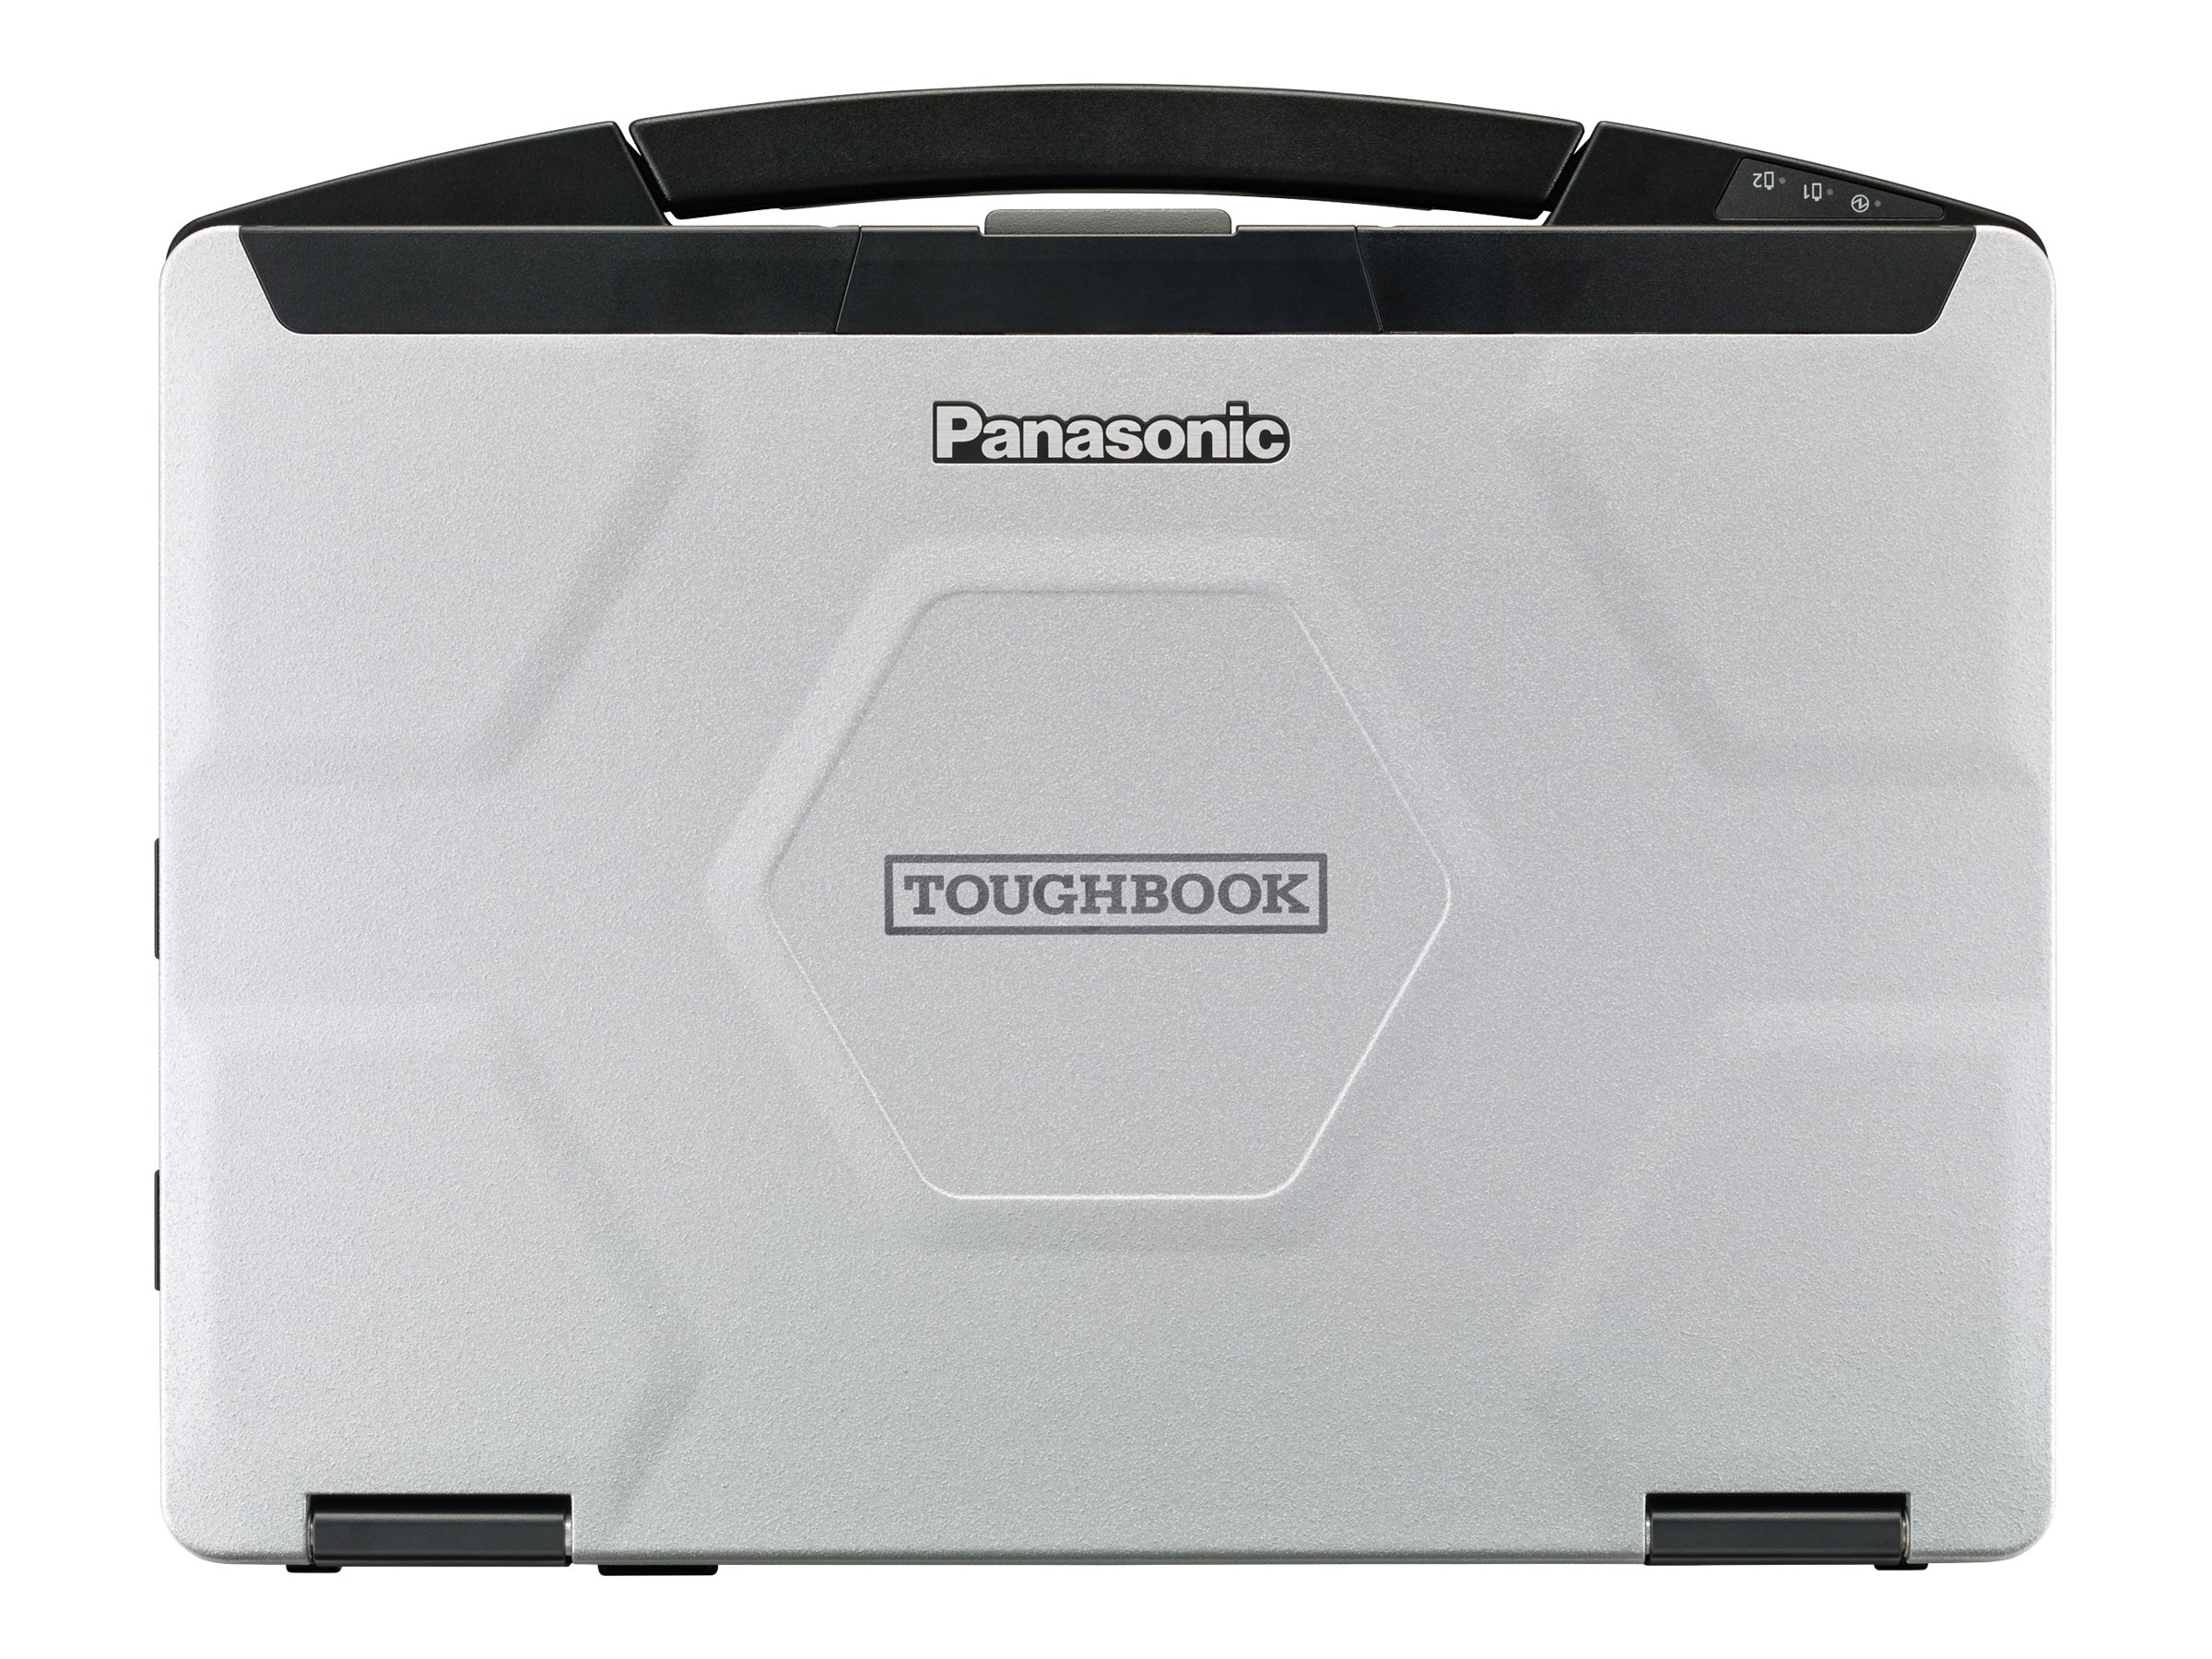 Panasonic Toughbook 54 Prime - Intel Core i7 - 7600U / up to 3.9 GHz - vPro - Win 10 Pro - HD Graphics 620 - 8 GB RAM - 256 GB SSD - 14" 1366 x 768 (HD) - Wi-Fi 5 - with Toughbook Preferred - image 5 of 16